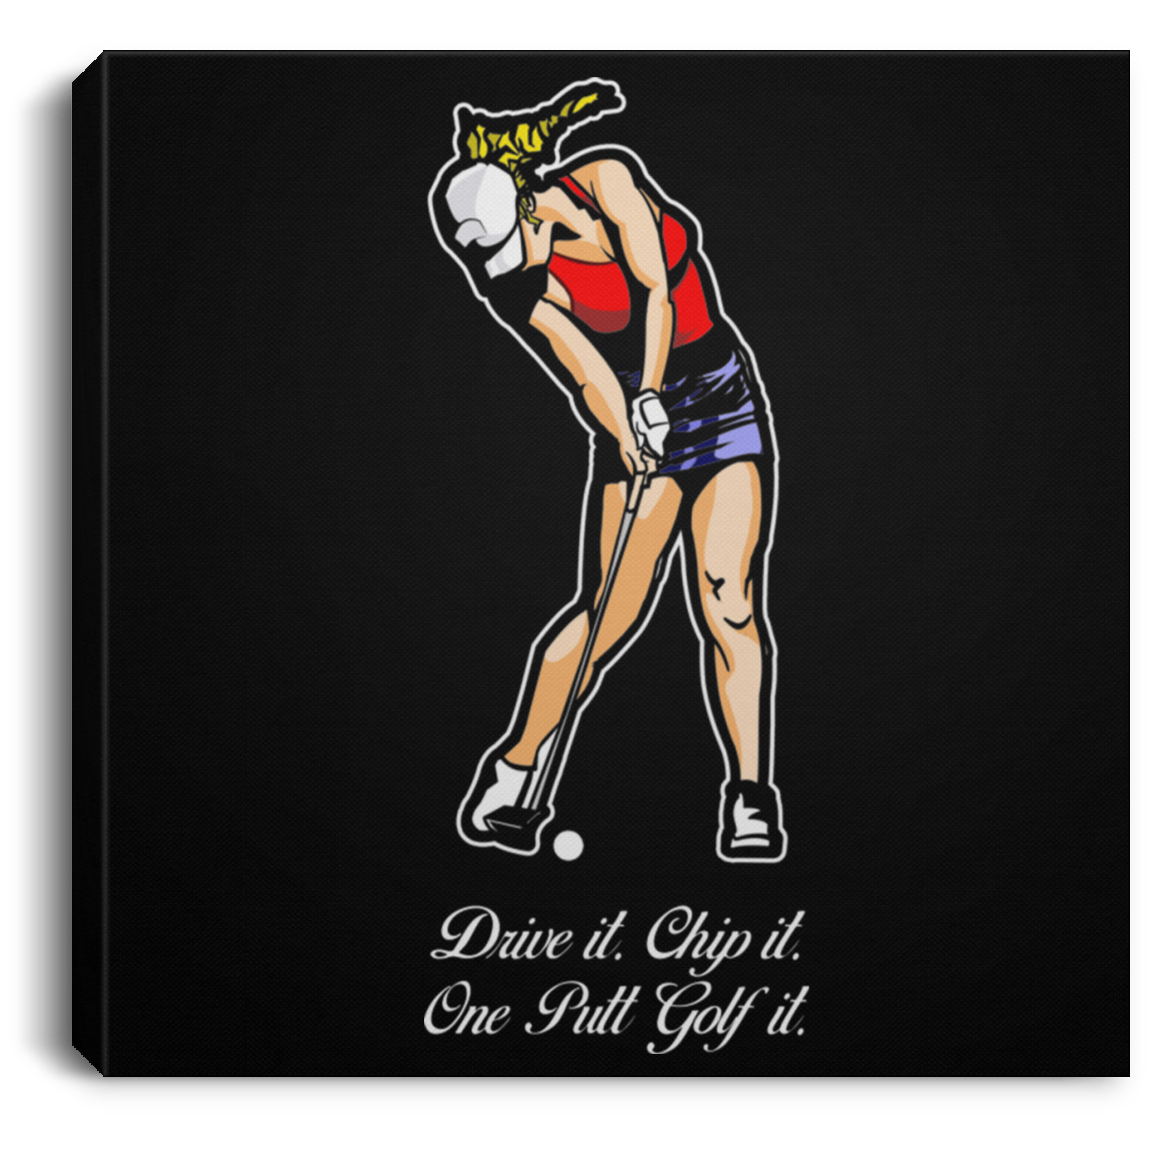 OPG Custom Design #9. Drive it. Chip it. One Putt Golf it. Square Canvas .75in Frame